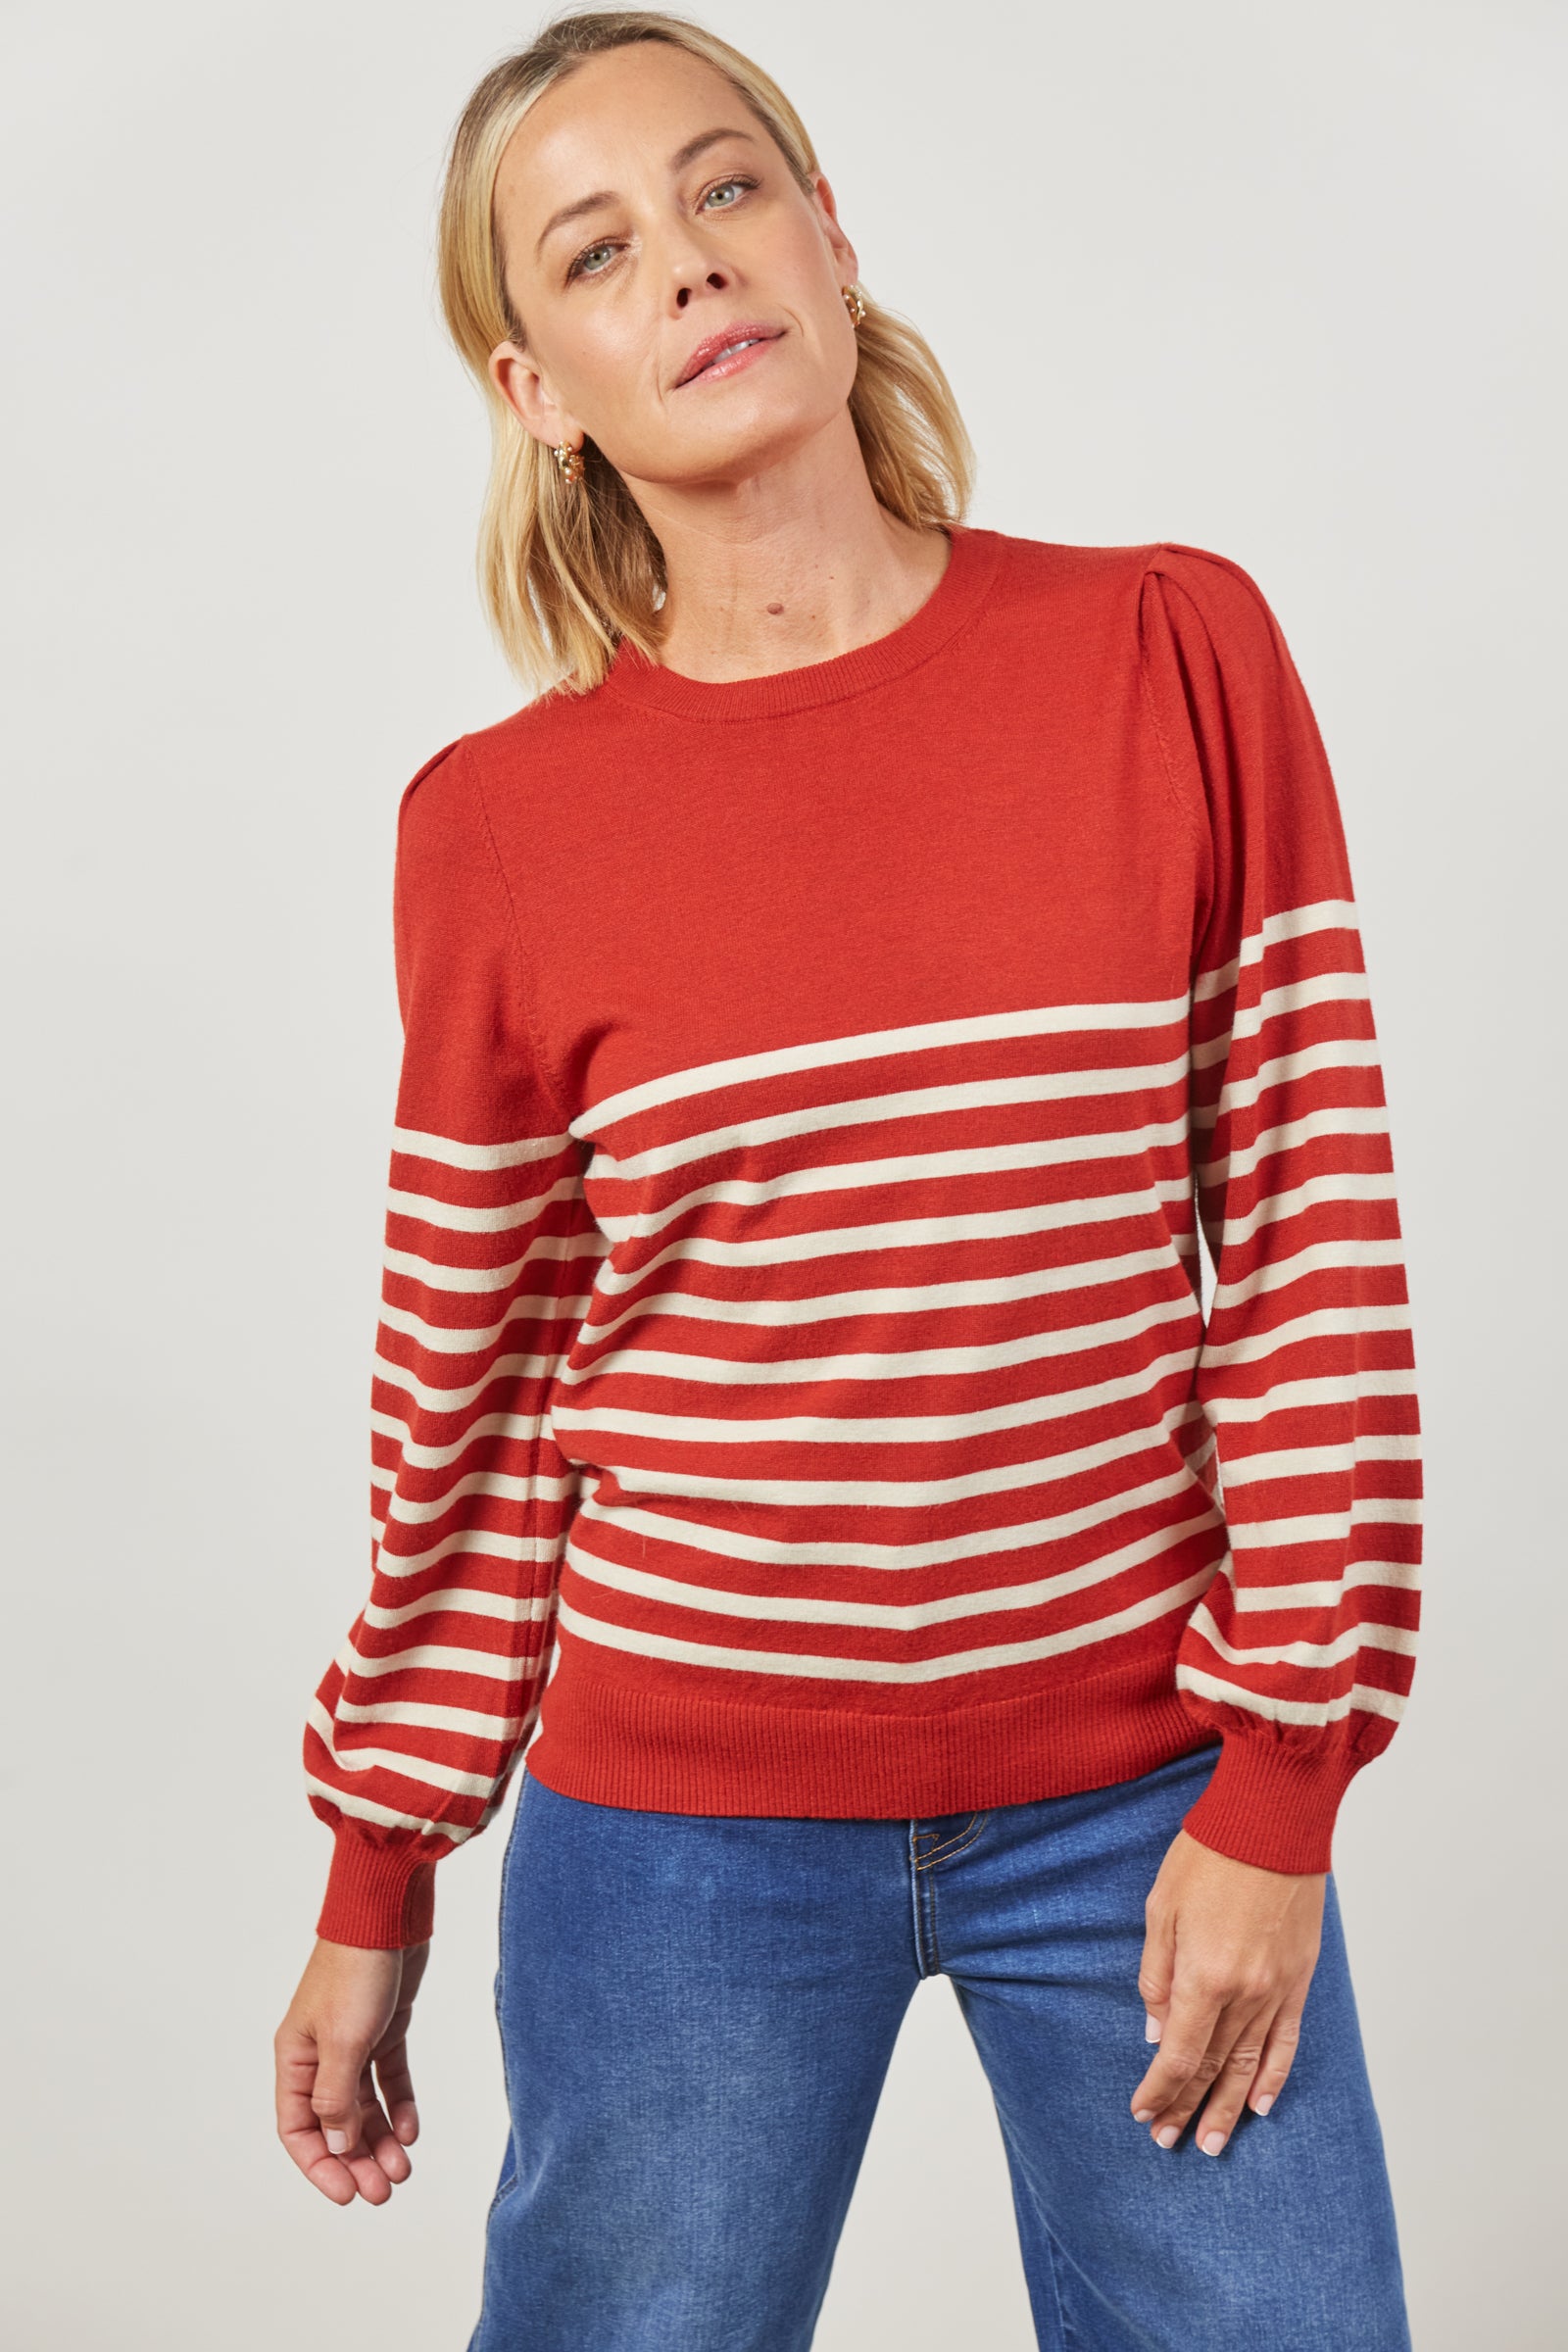 Cosmo Stripe Jumper - Picante - Isle of Mine Clothing - Knit Jumper